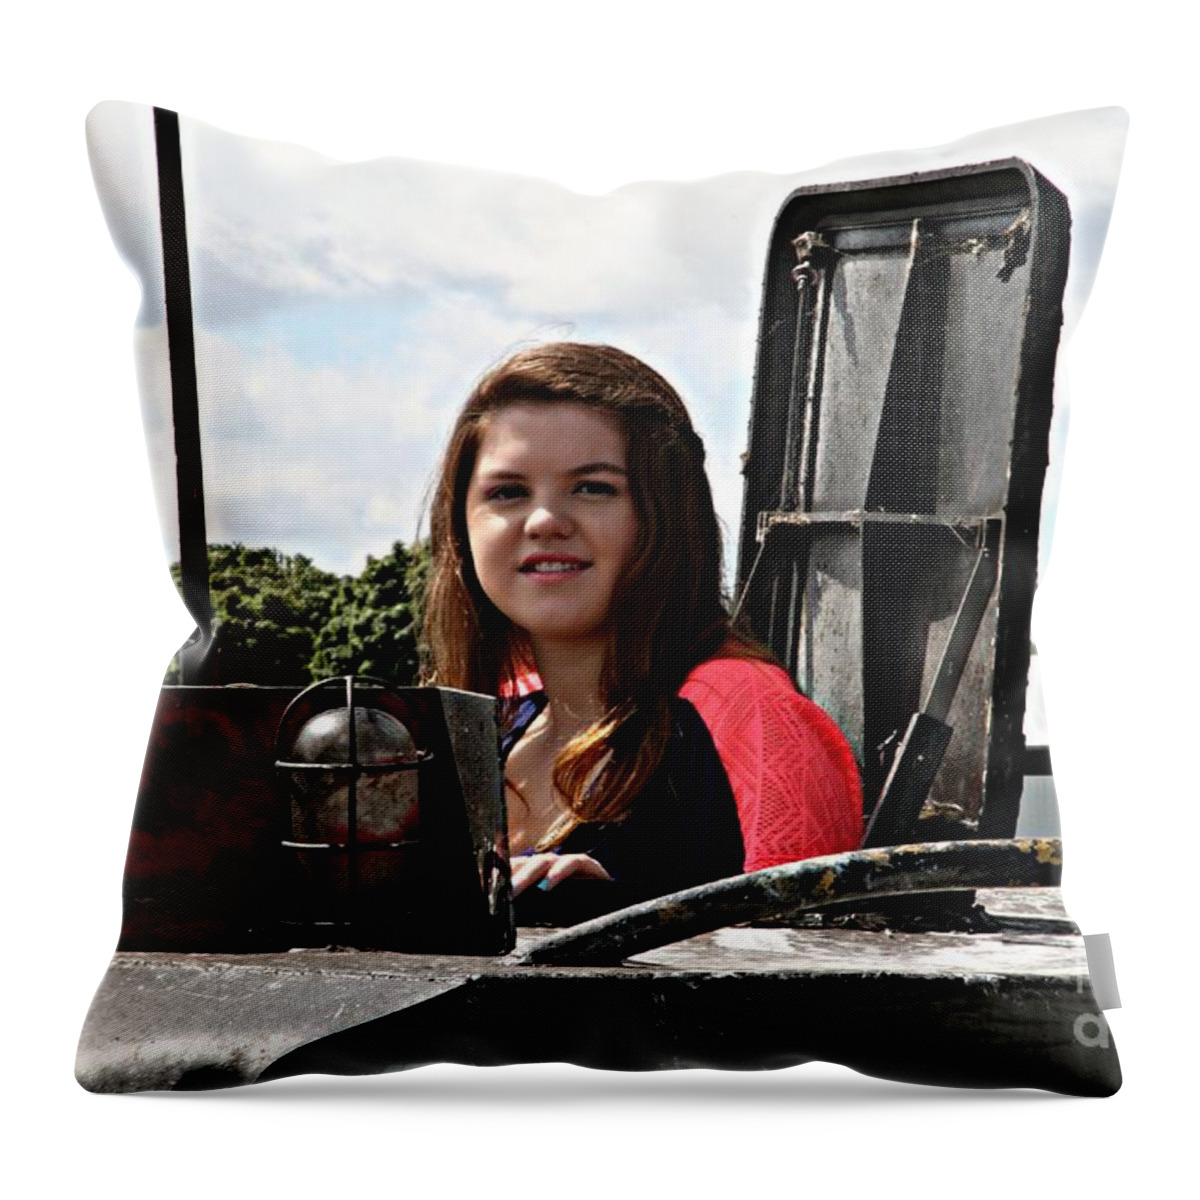  Throw Pillow featuring the photograph 3597 by Mark J Seefeldt